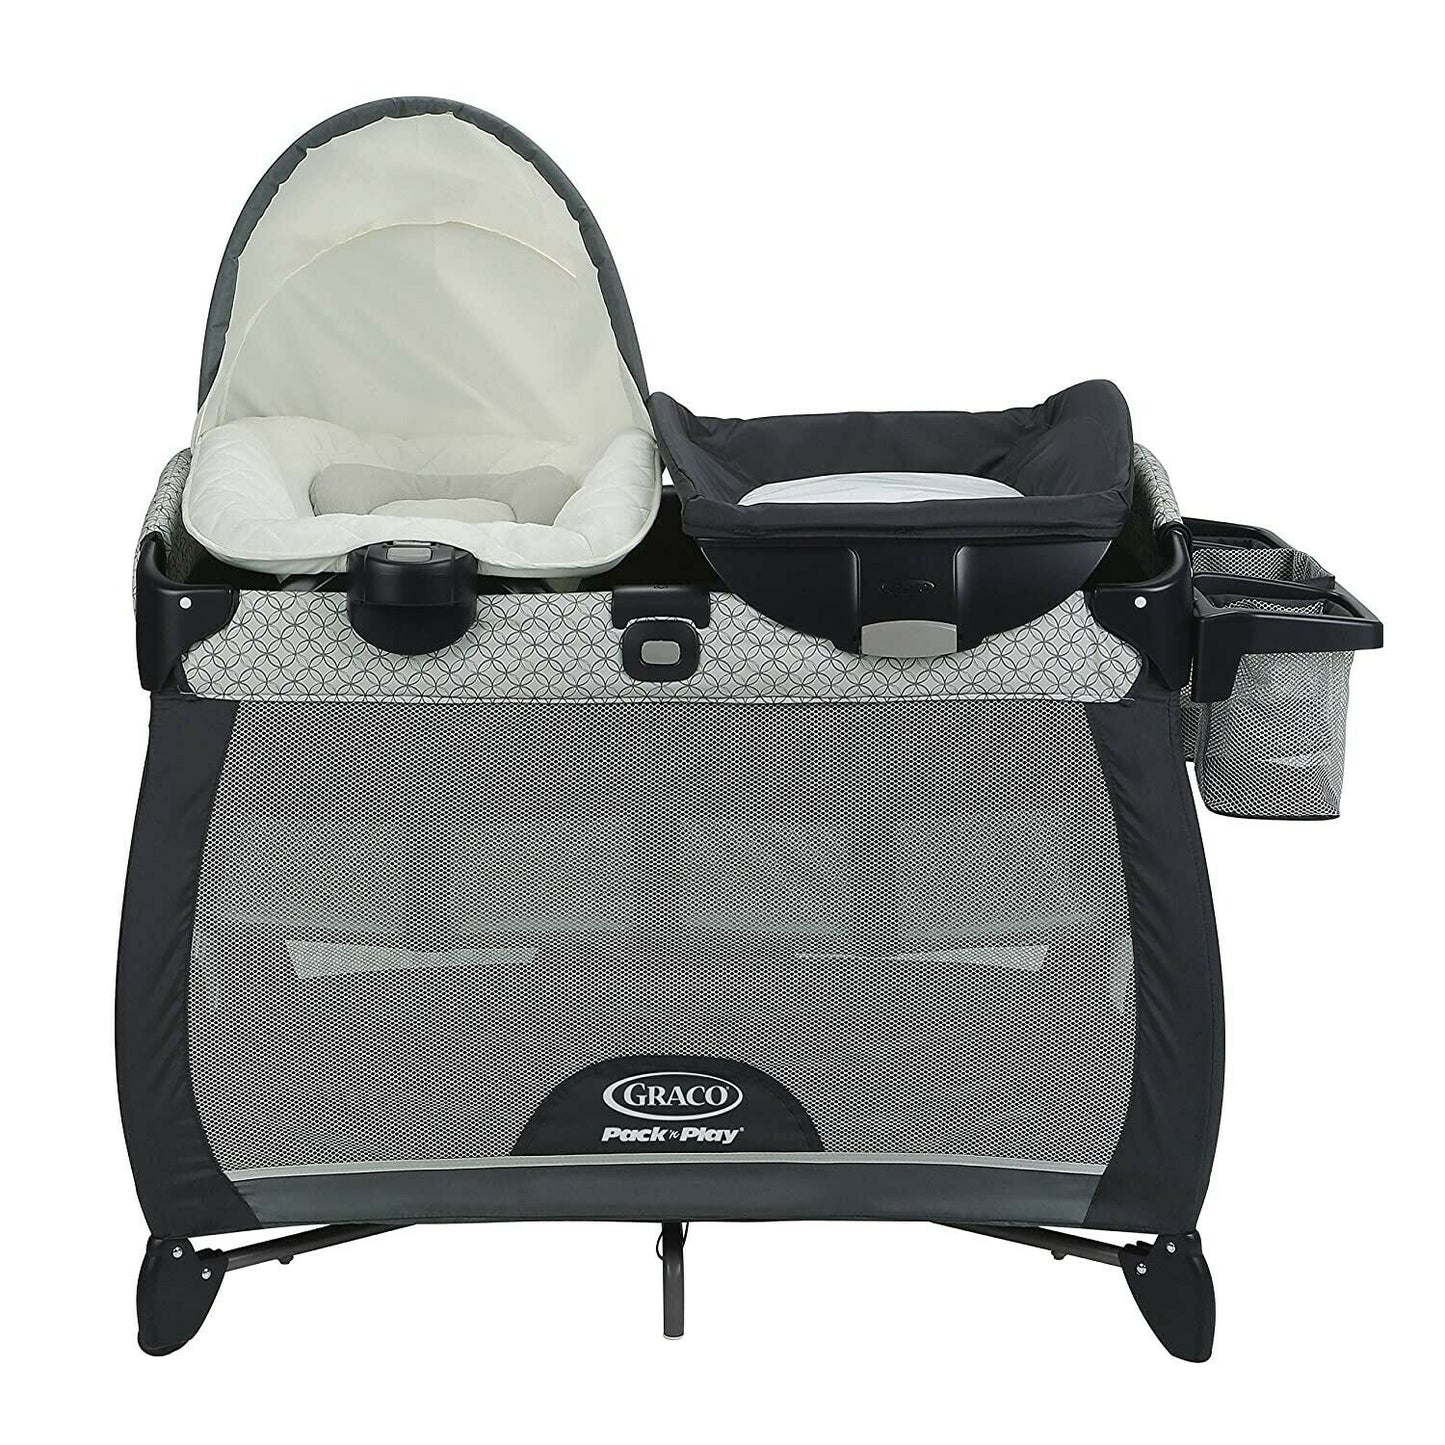 Graco Baby Stroller Travel System with Car seat Bouncer High Chair Playard Combo